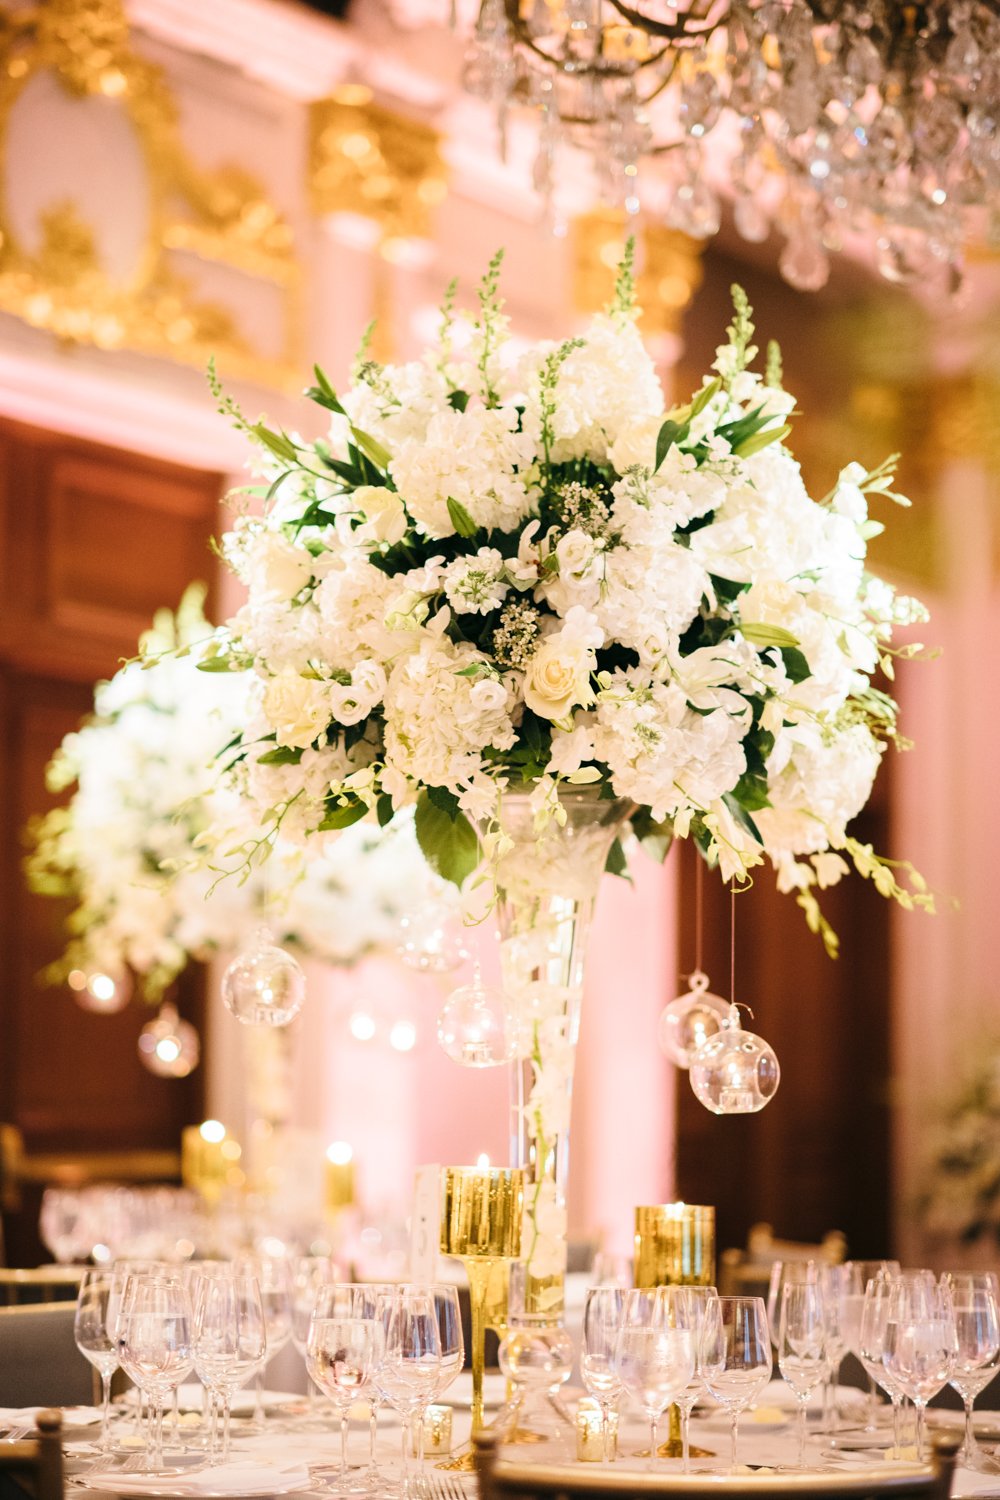 White flowers with green accents are in a vase on a table, surrounded by wine glasses.

Manhattan Luxury Wedding. New York Luxury Wedding Photographer. Wedding in Manhattan. NYC Luxury Wedding.